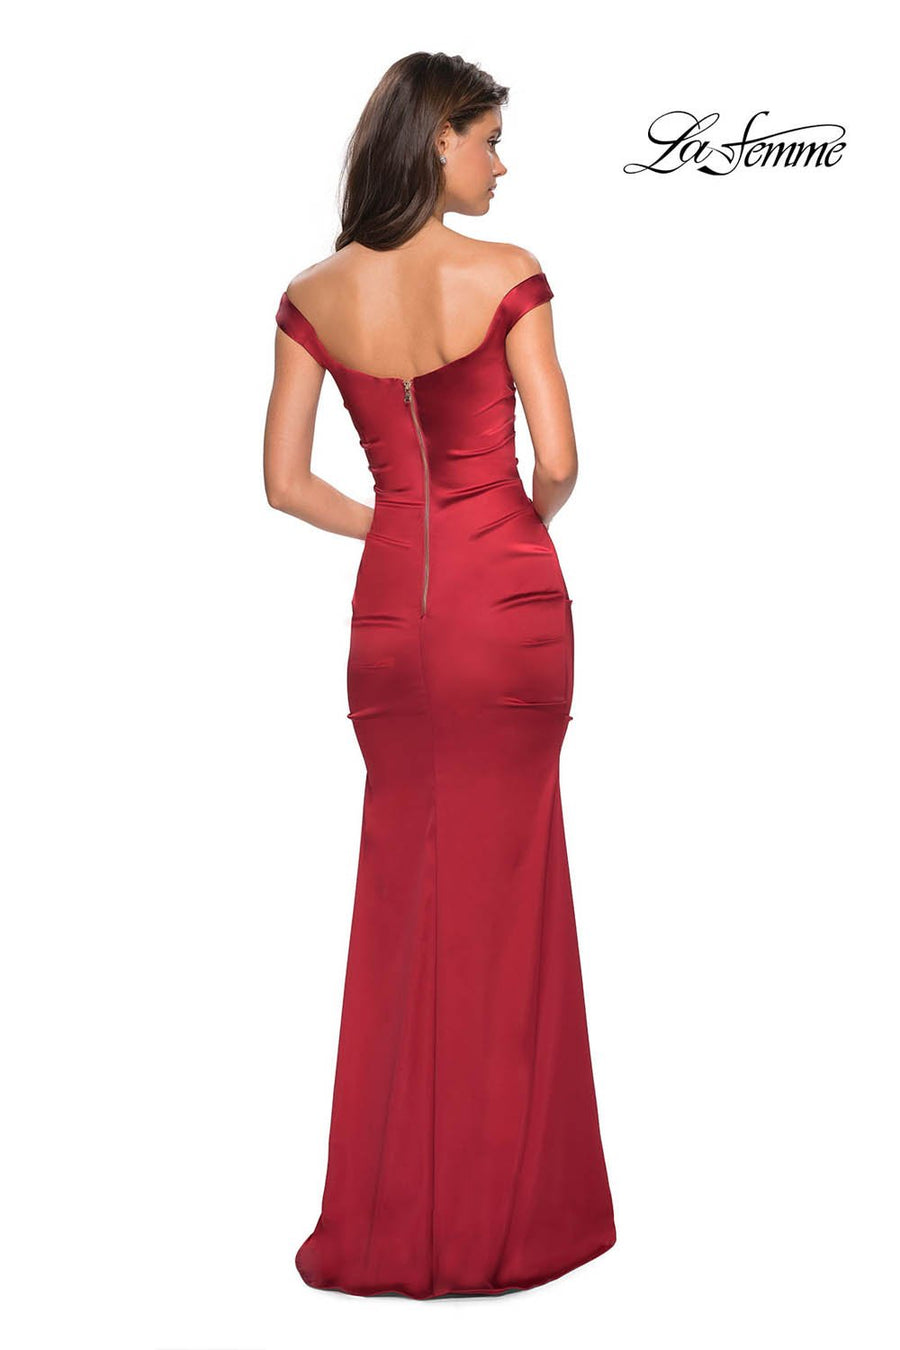 La Femme 27821 prom dress images.  La Femme 27821 is available in these colors: Red.